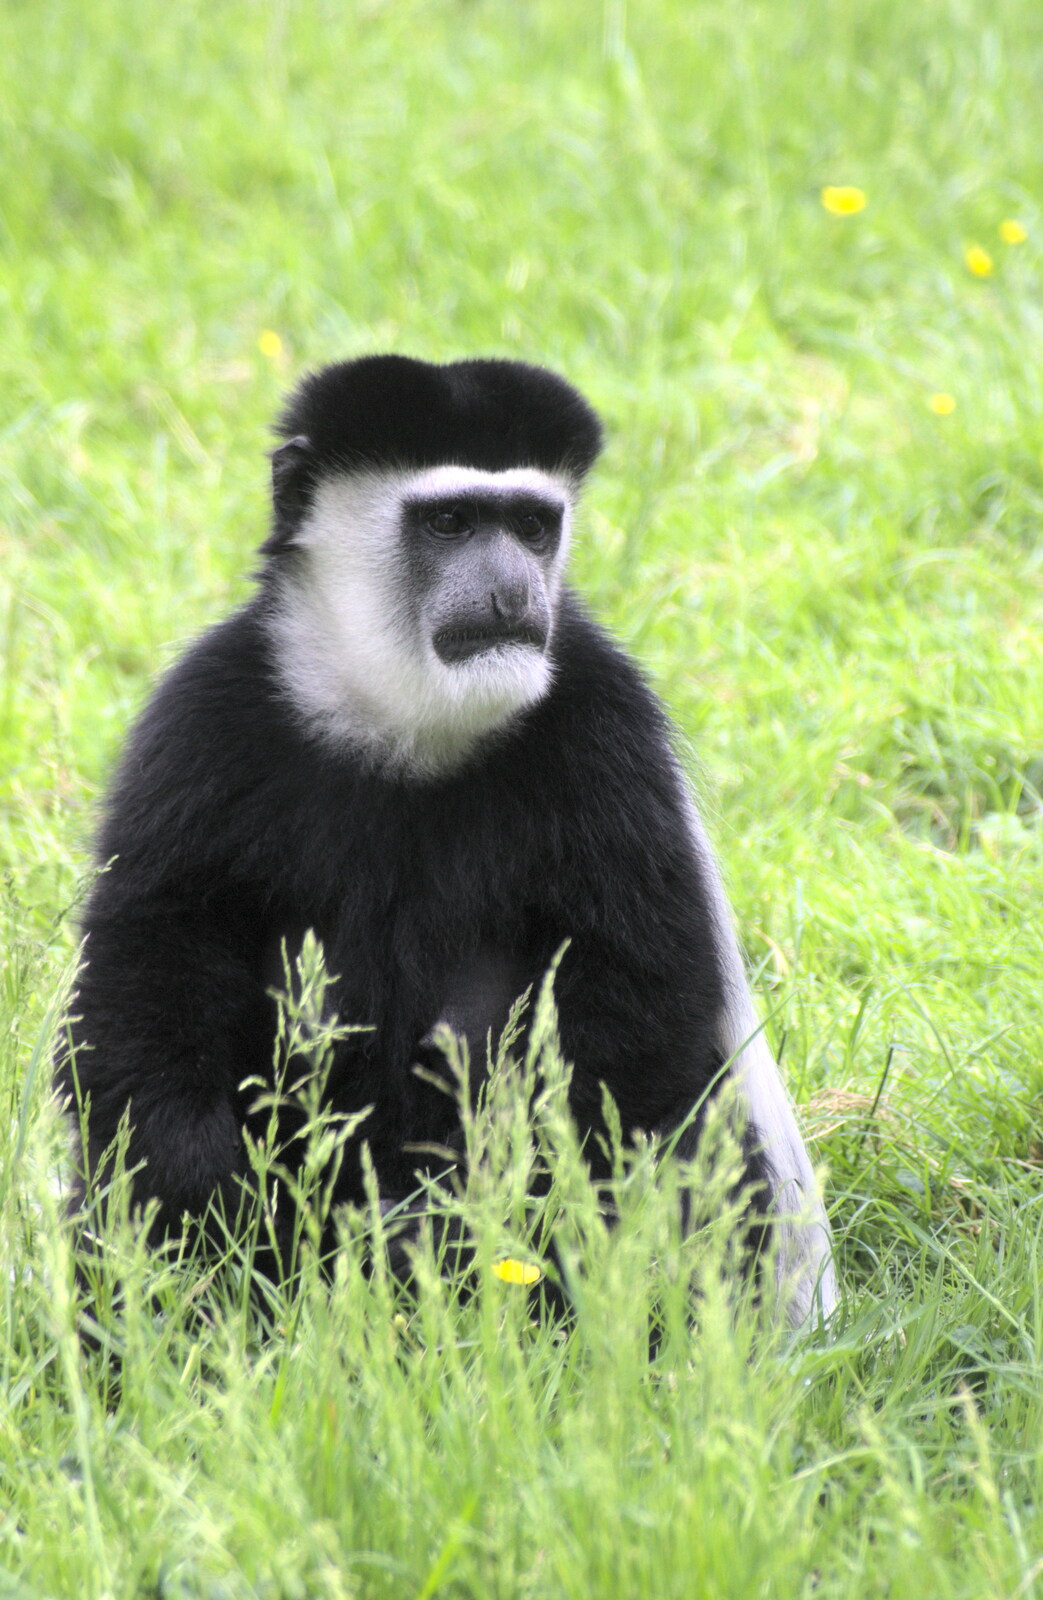 A glum-looking Colobus monkey from Another Trip to Banham Zoo, Banham, Norfolk - 6th June 2012